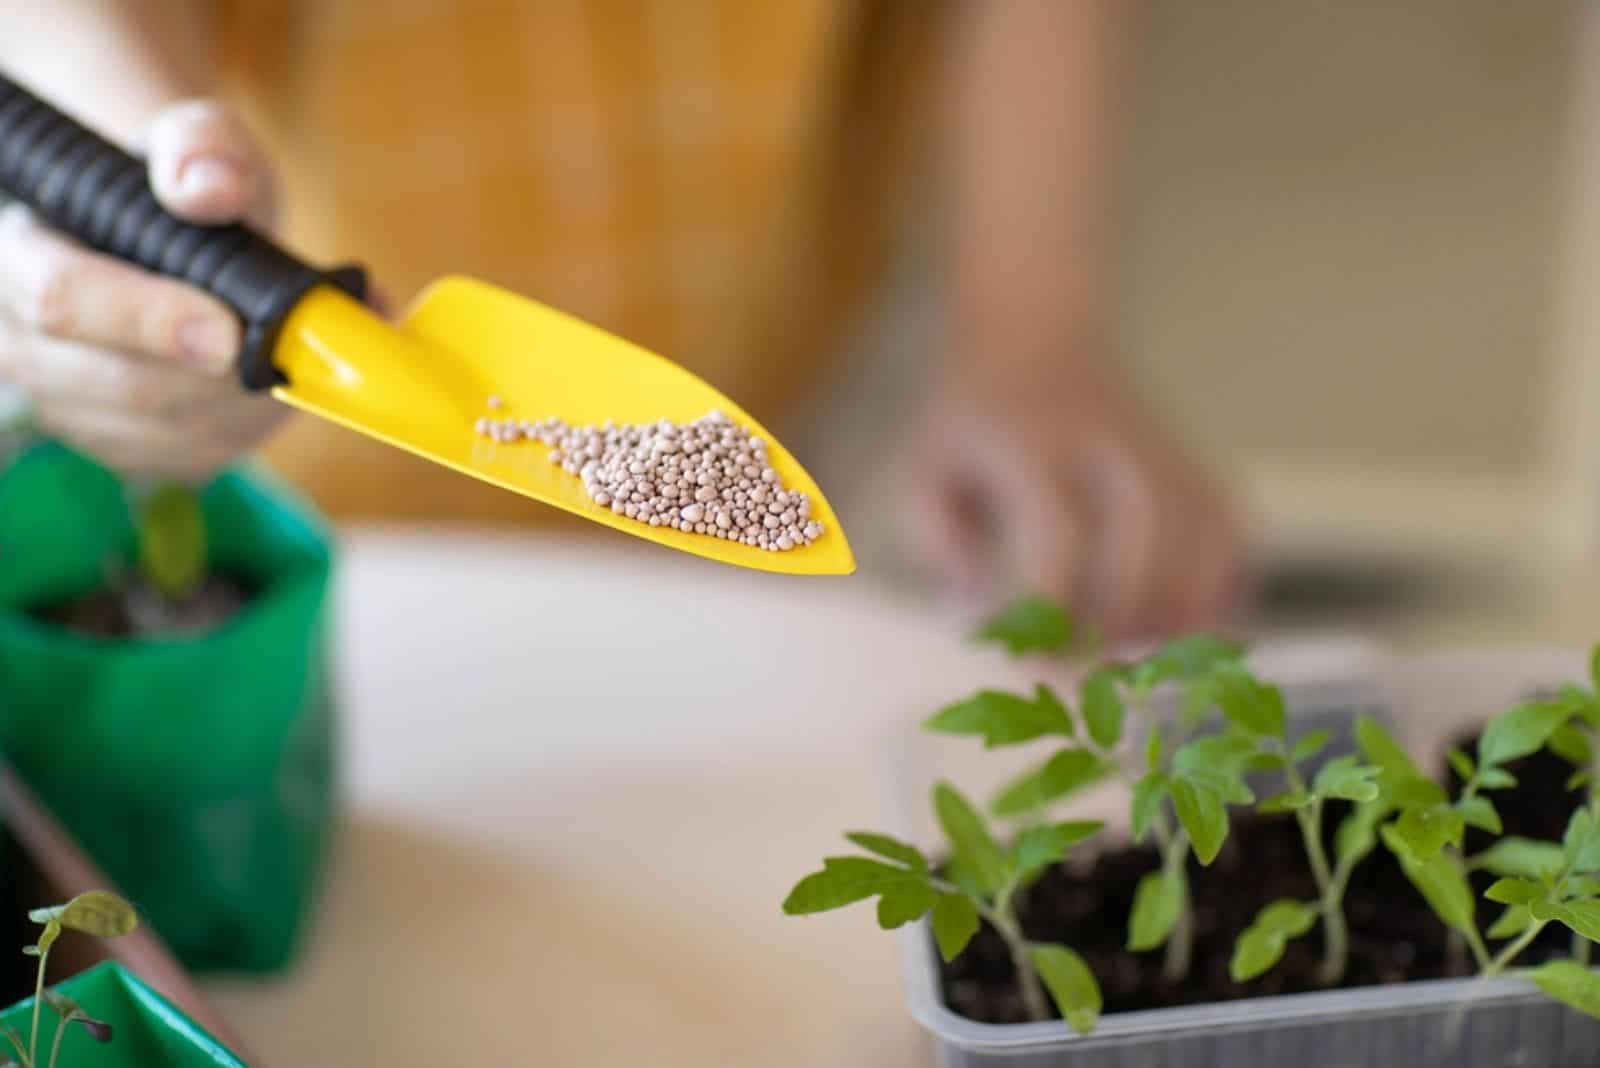 fertilizer for vegetable seedlings on a yellow spatula